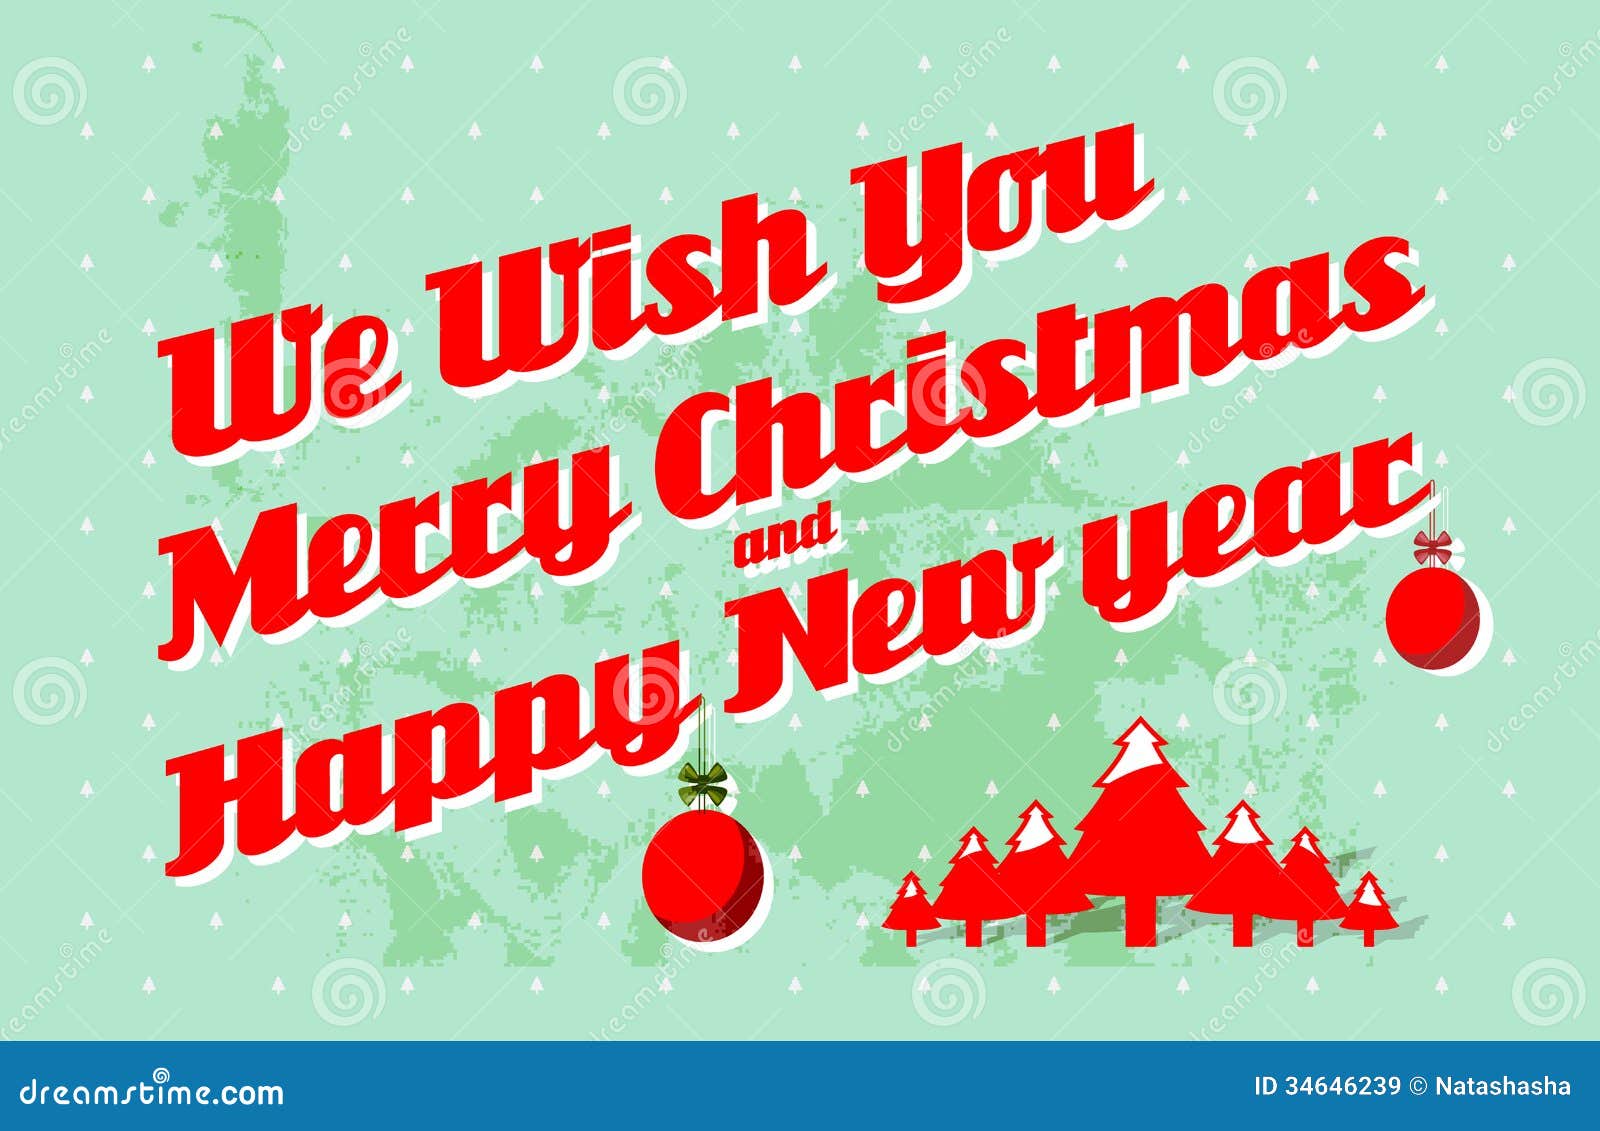 clipart merry christmas and happy new year - photo #19